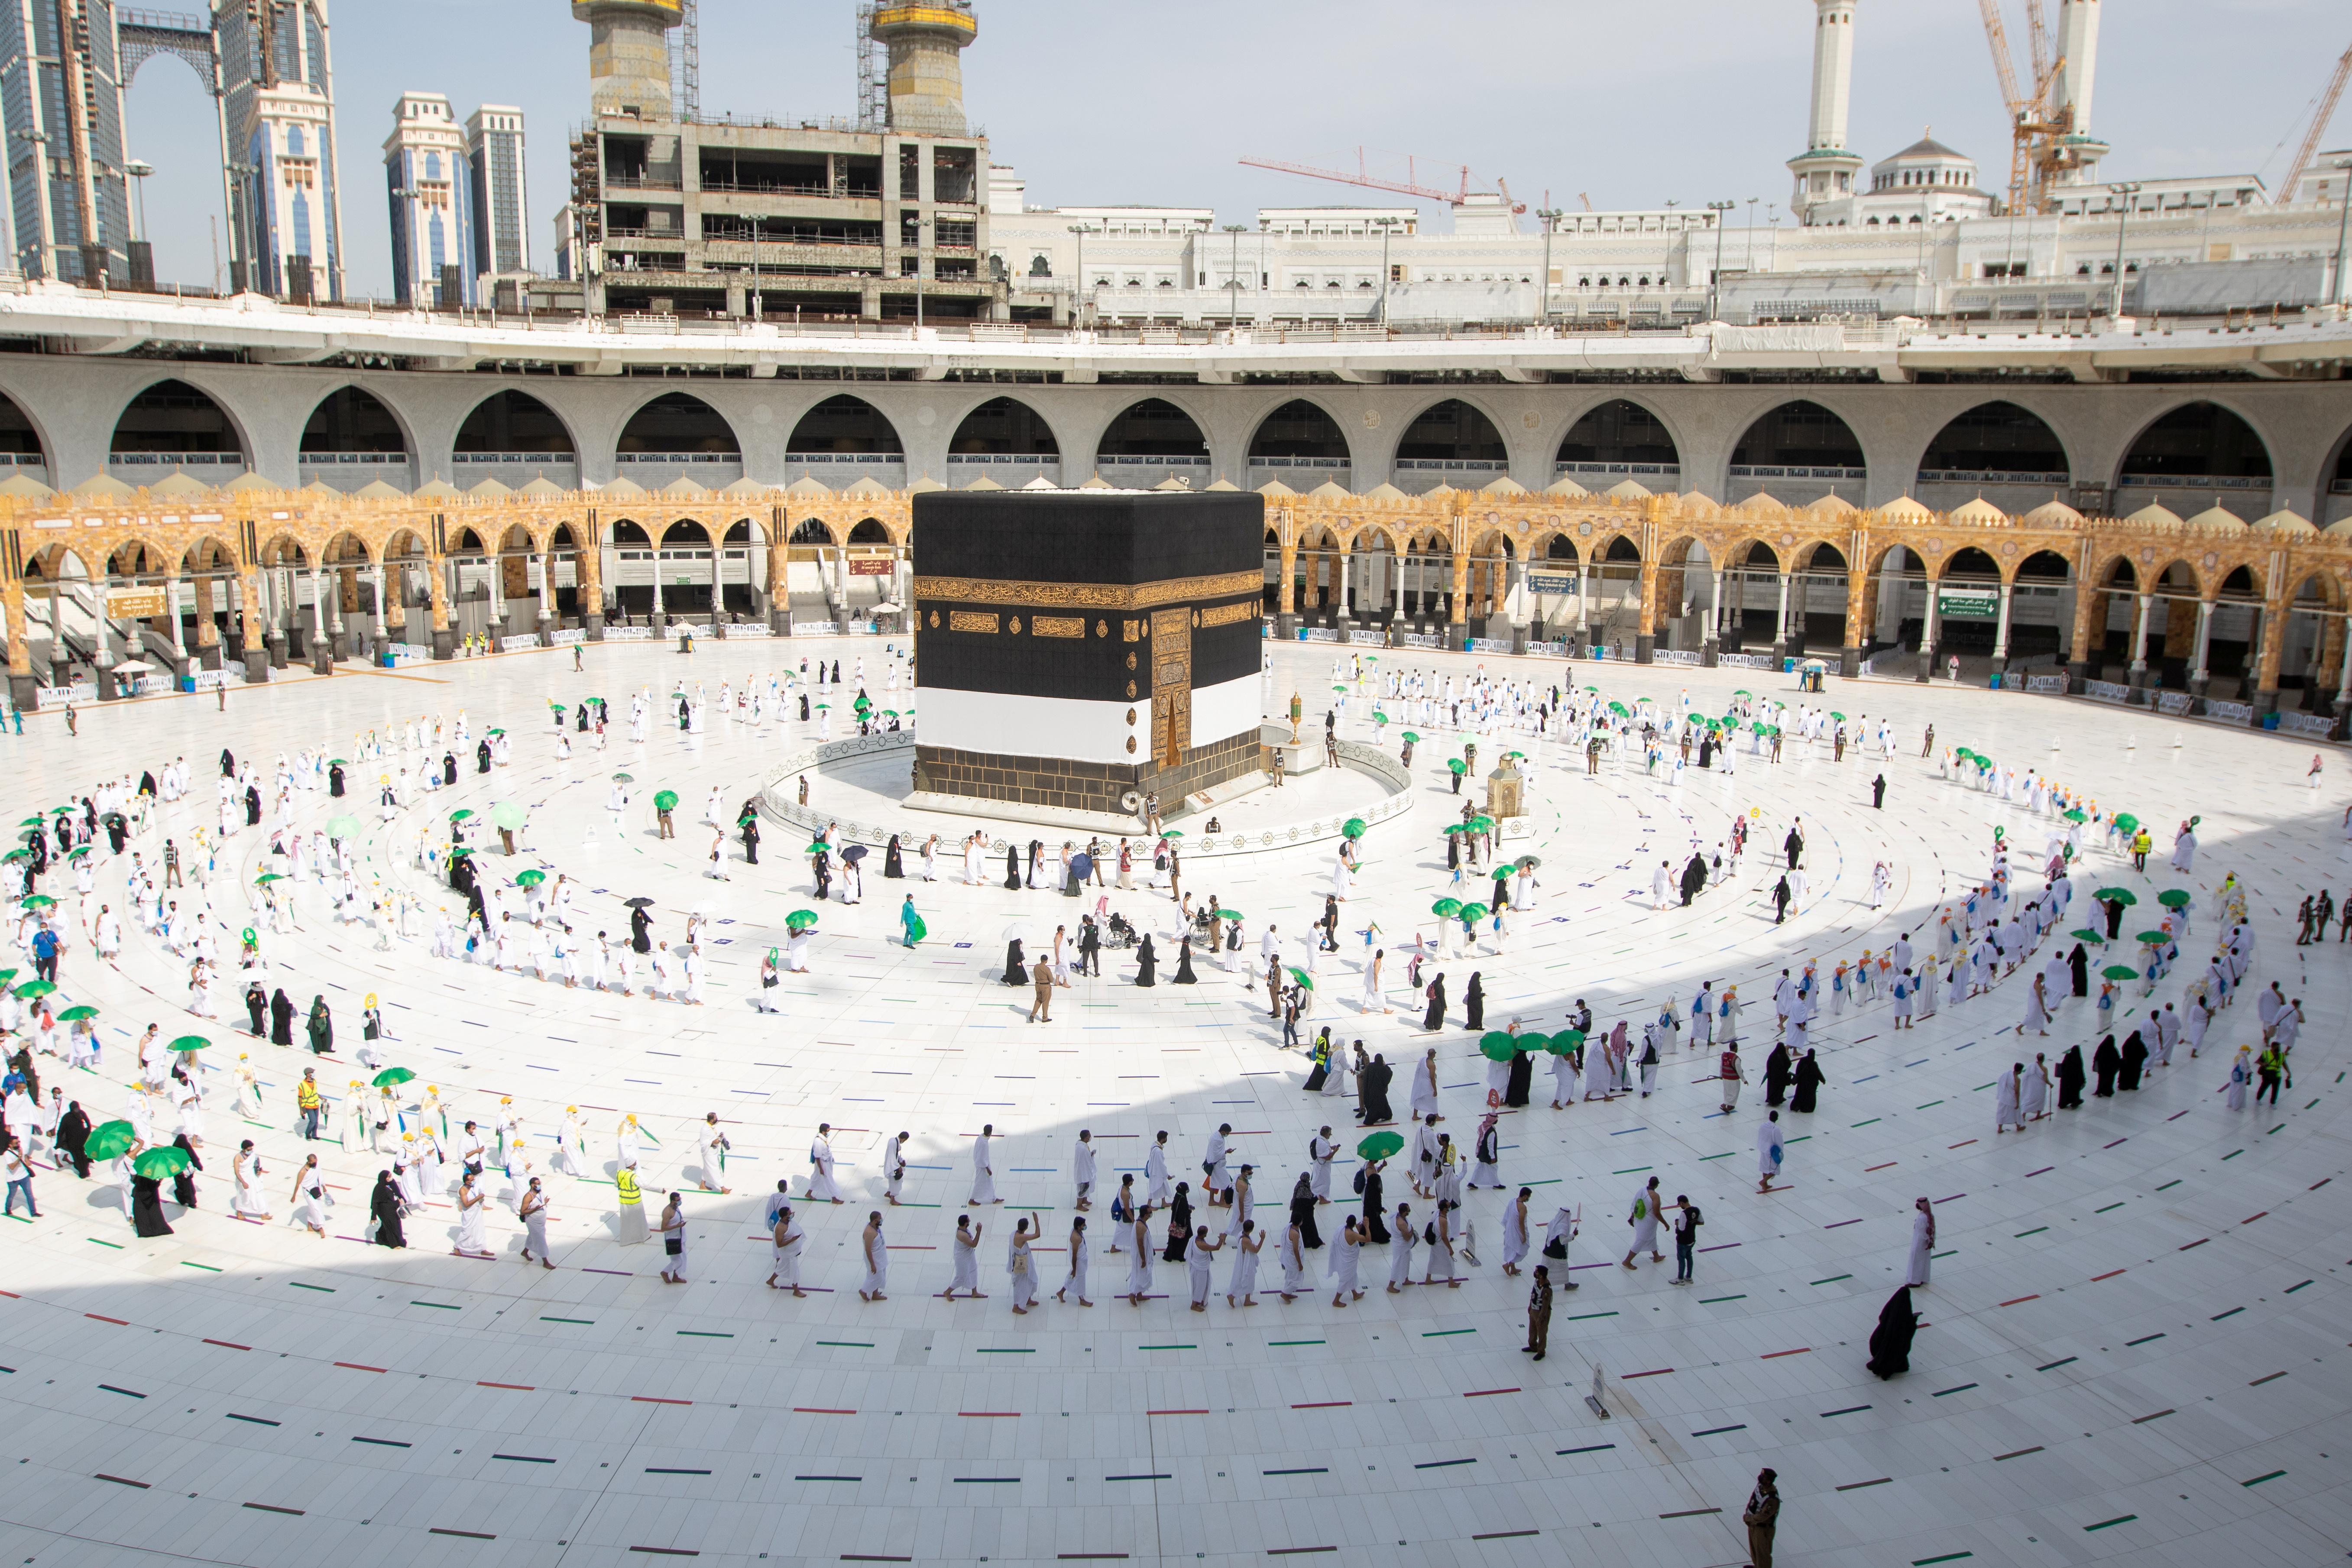 Pilgrims keeping social distance perform their Umrah in the Grand Mosque during the annual Haj pilgrimage, in the holy city of Mecca